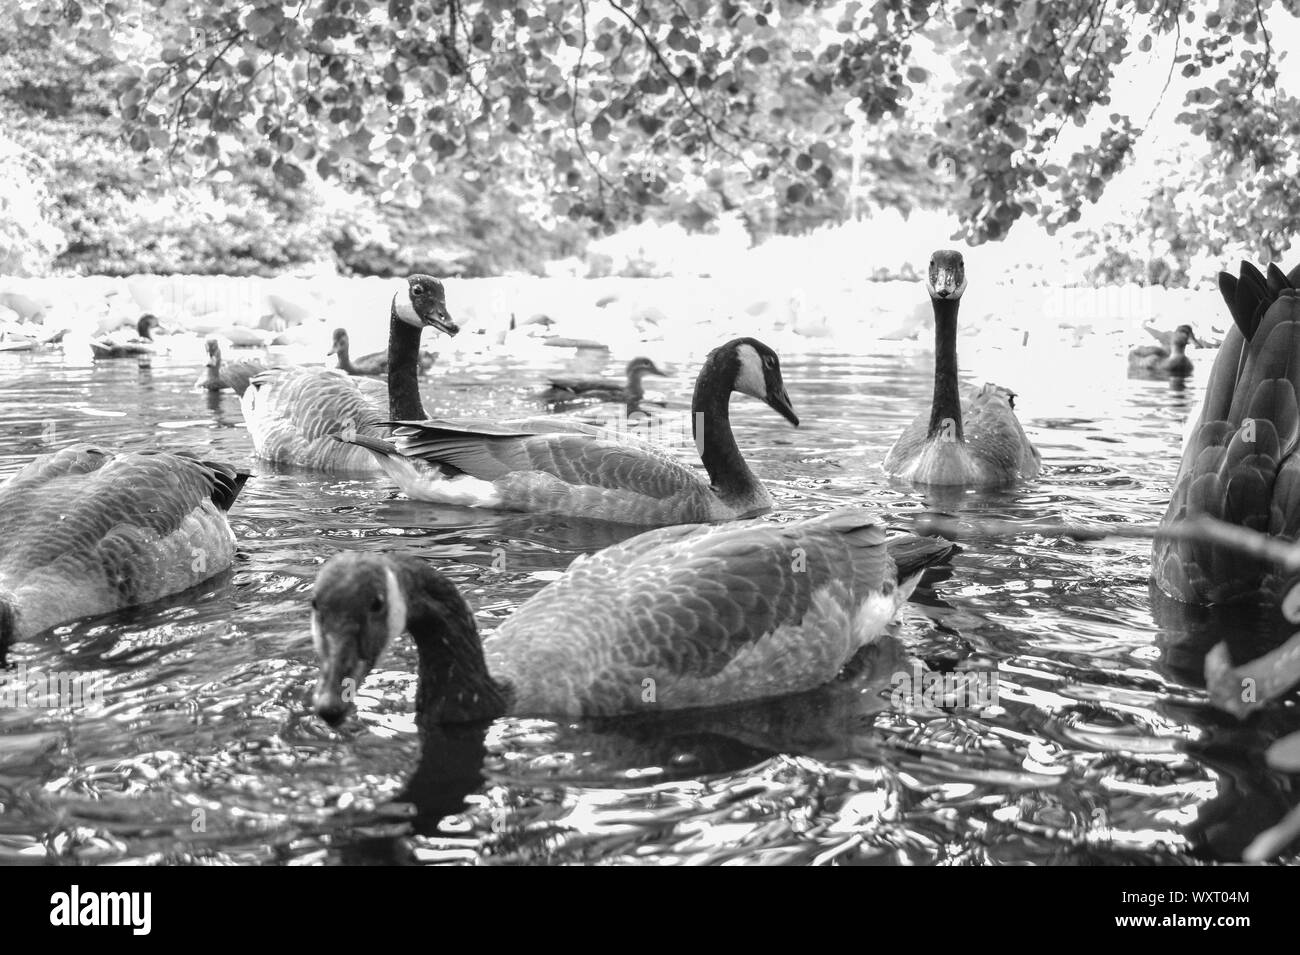 Several Canadian Geese Goose on a lake in black and white Stock Photo